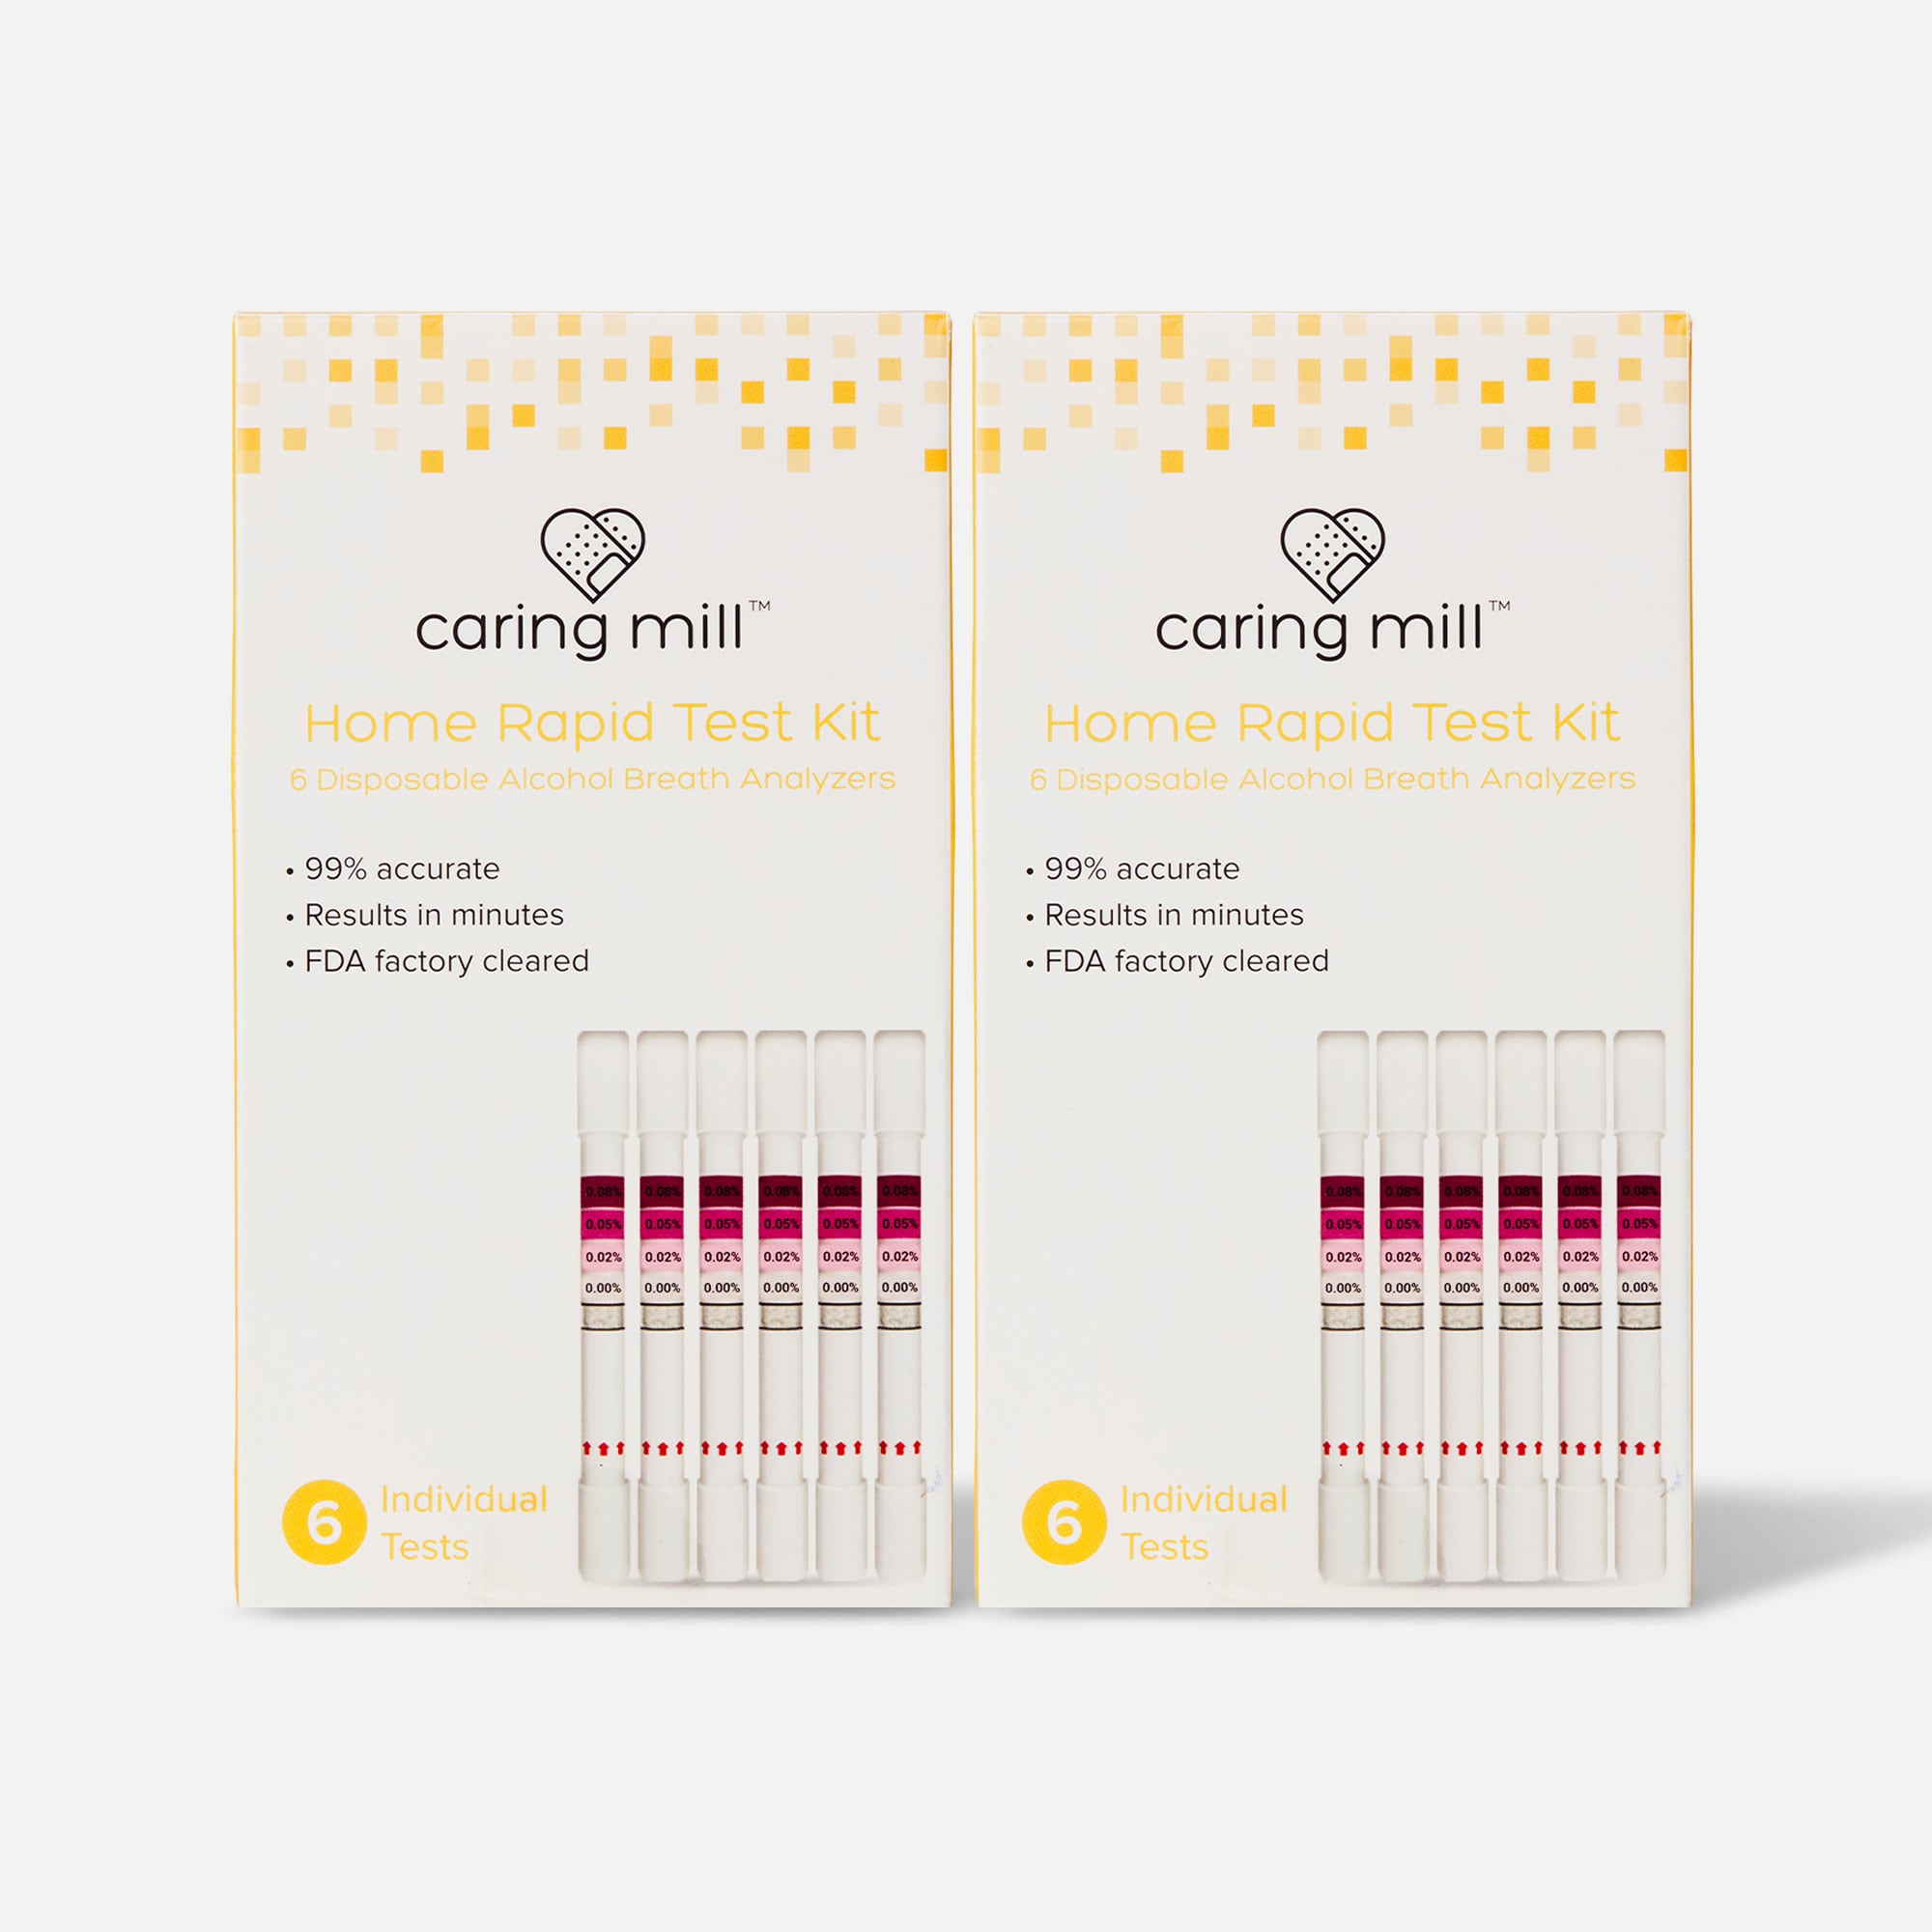 HSA-Eligible | Caring Mill Alcohol Breath Analyzer Home Rapid Test, Disposable, 6 ct